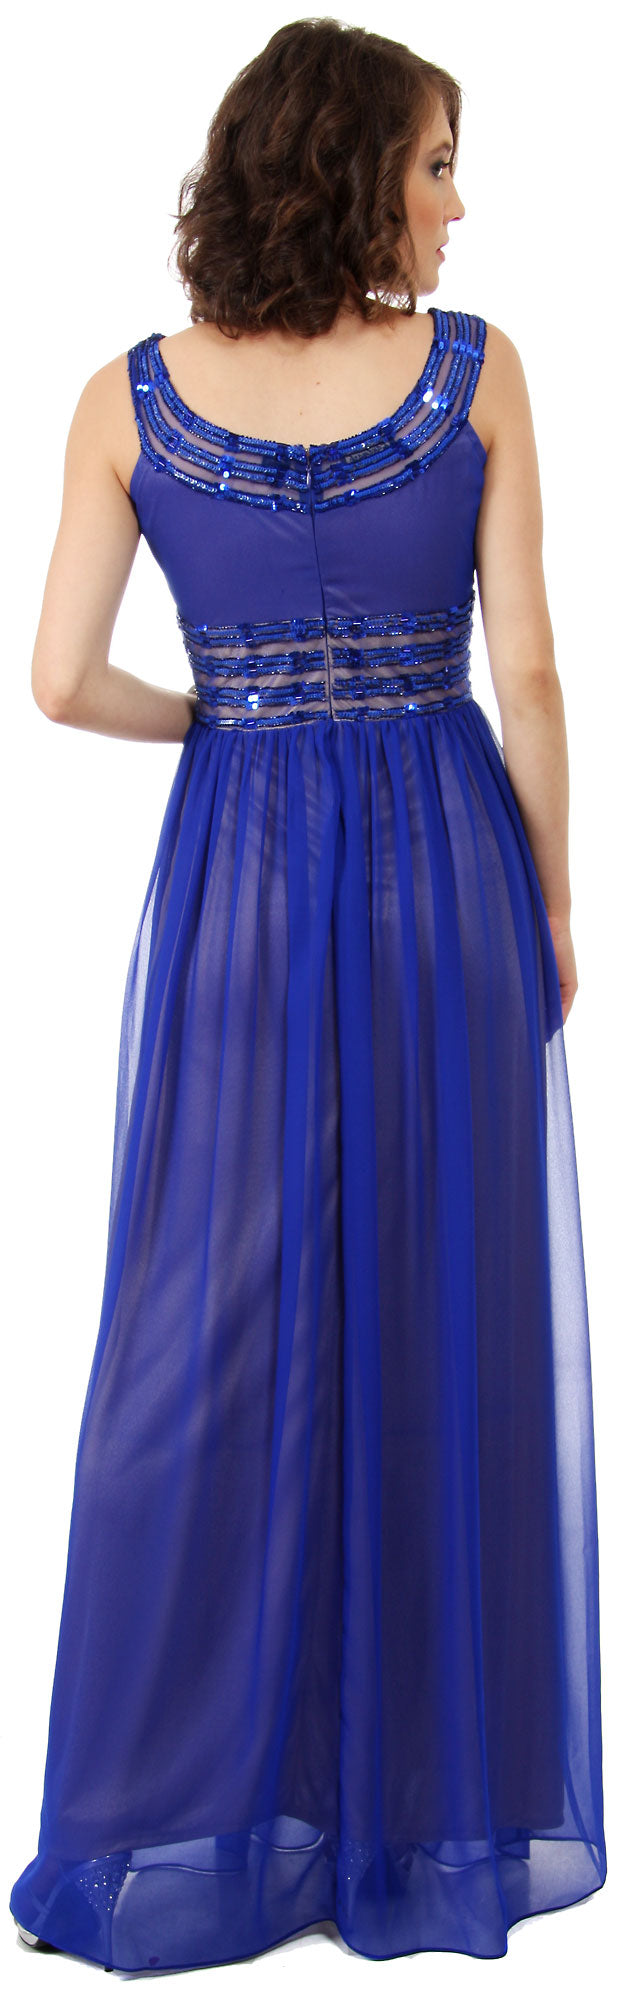 Image of Round Neck Empire Cut Sequined Floor Length Prom Dress back in Royal Blue/Gold